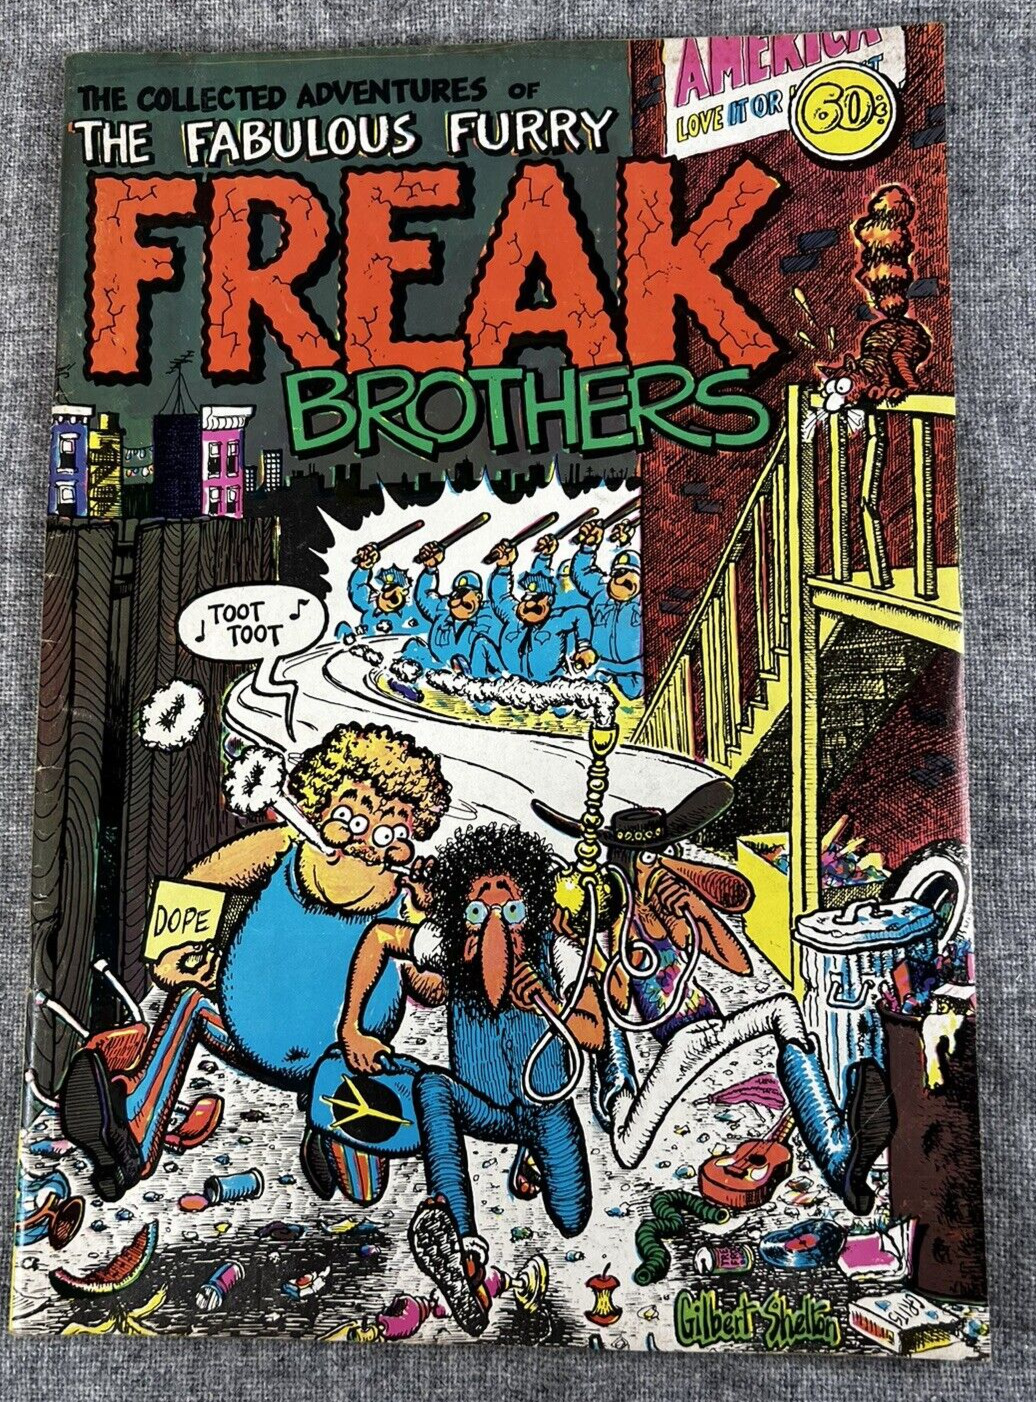 1971 The Collected Adventures of the Fabulous Furry Freak Brothers Comic #1